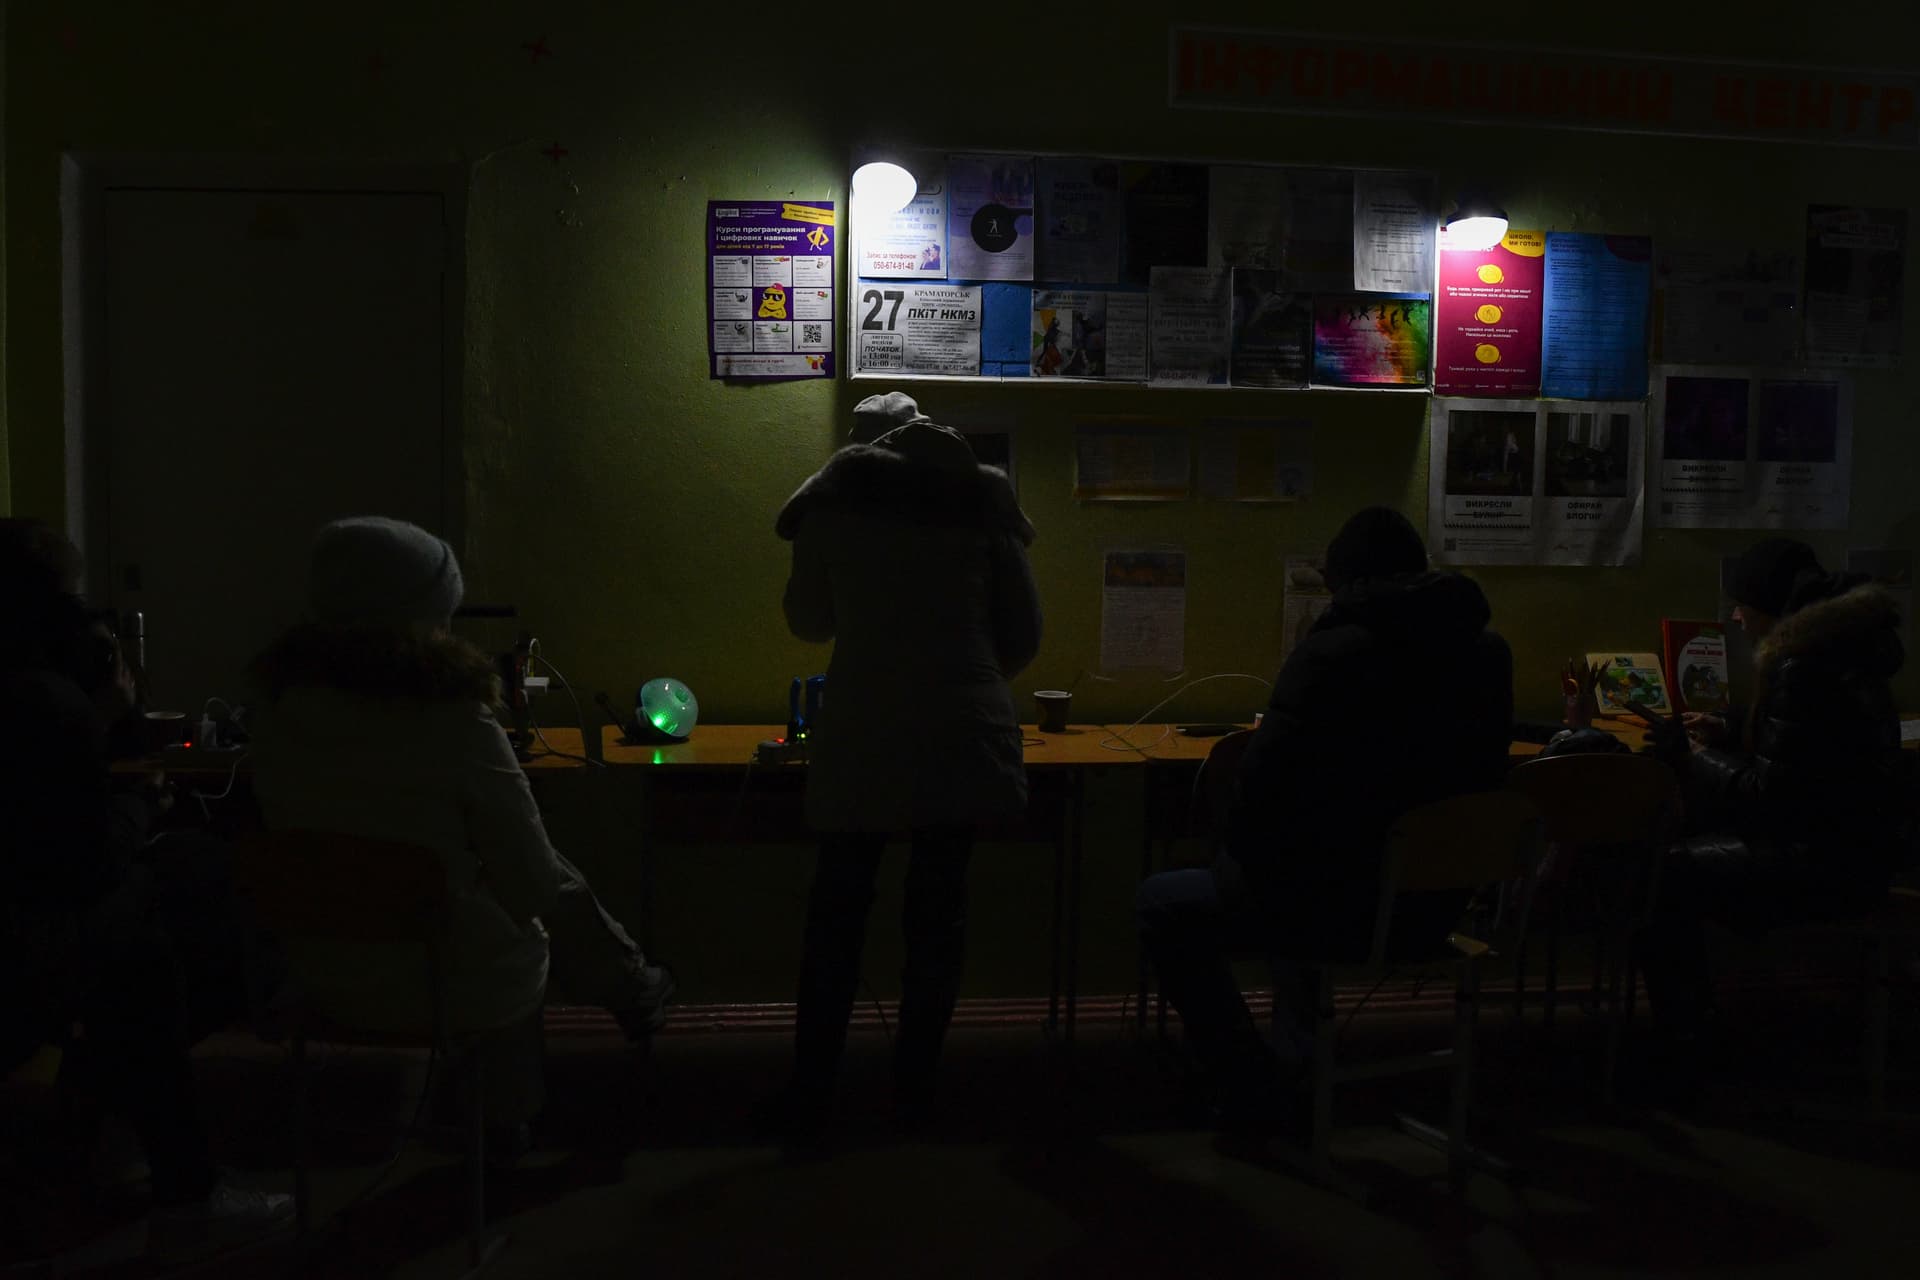 People charge their phones with the help of generators at a school building, a Point of Invincibility, in Kramatorsk